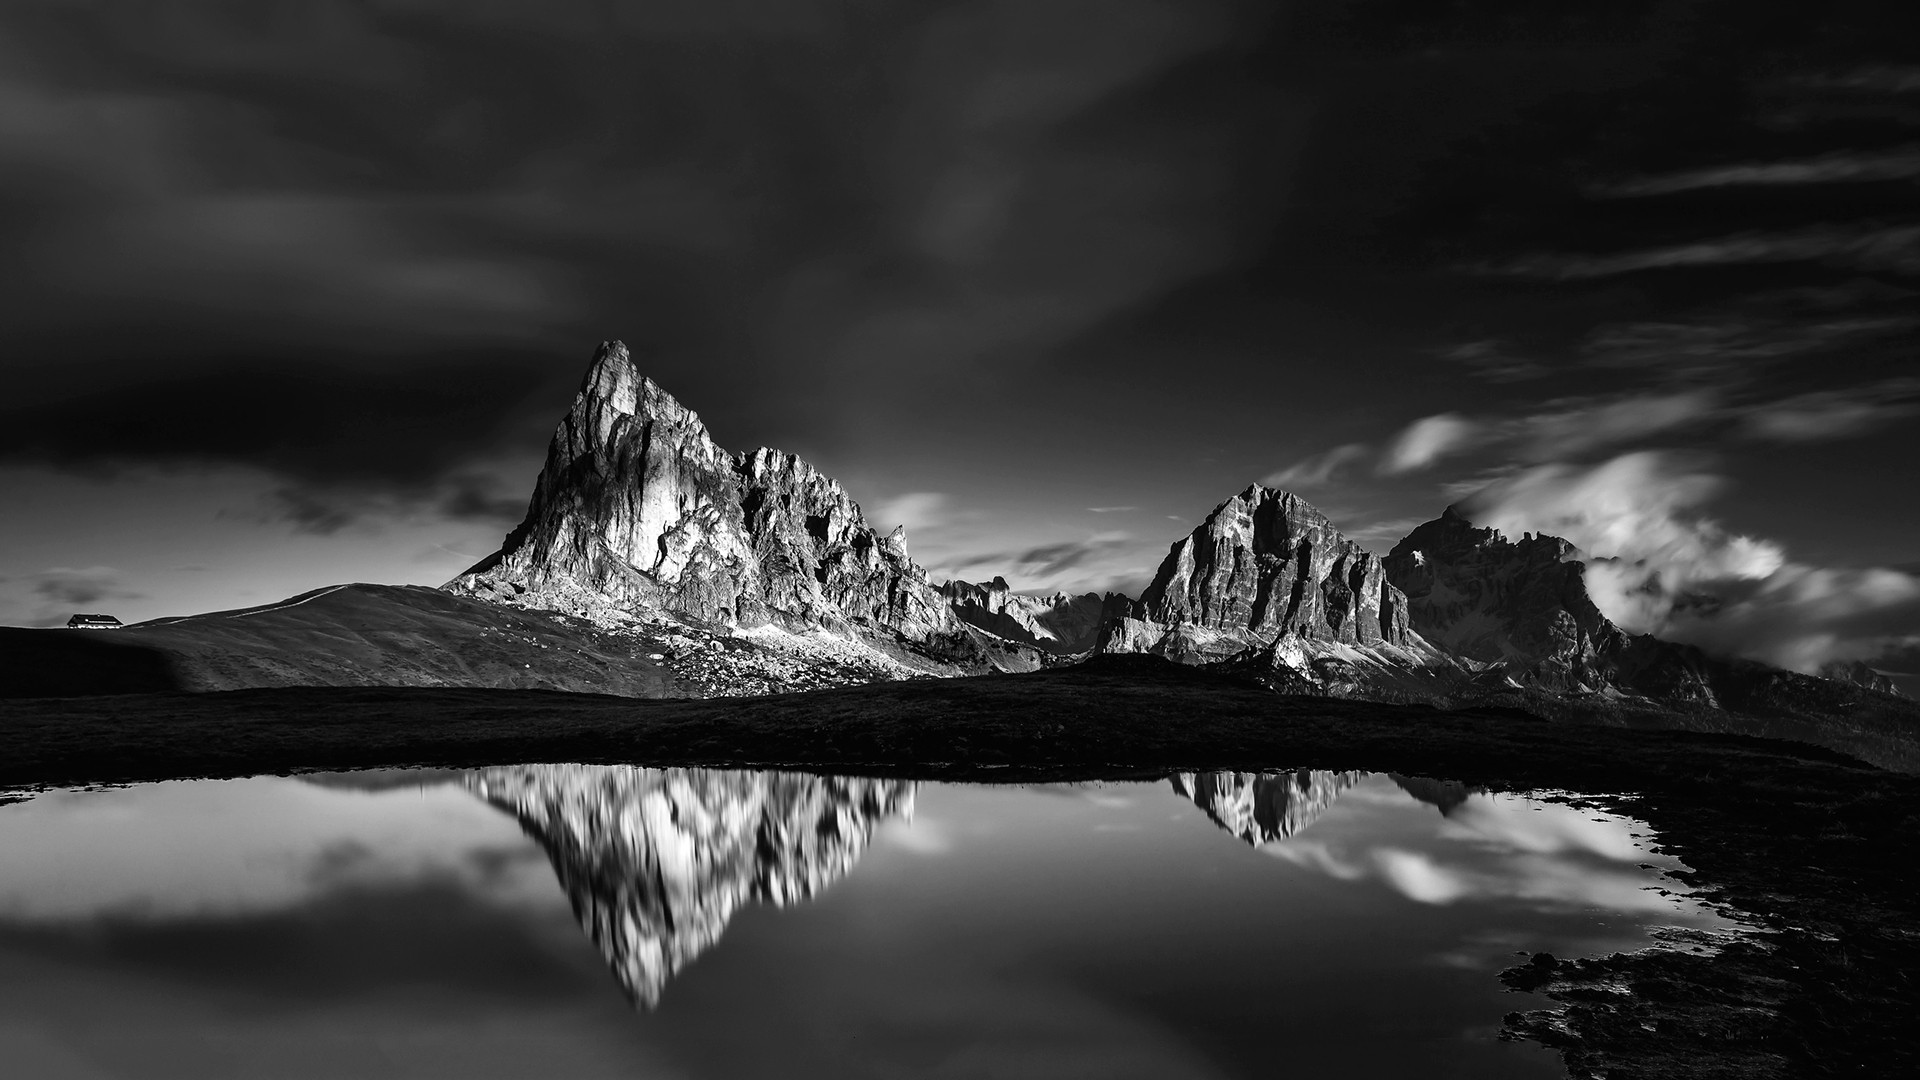 General 1920x1080 nature landscape mountains clouds Dolomites lake water house reflection monochrome